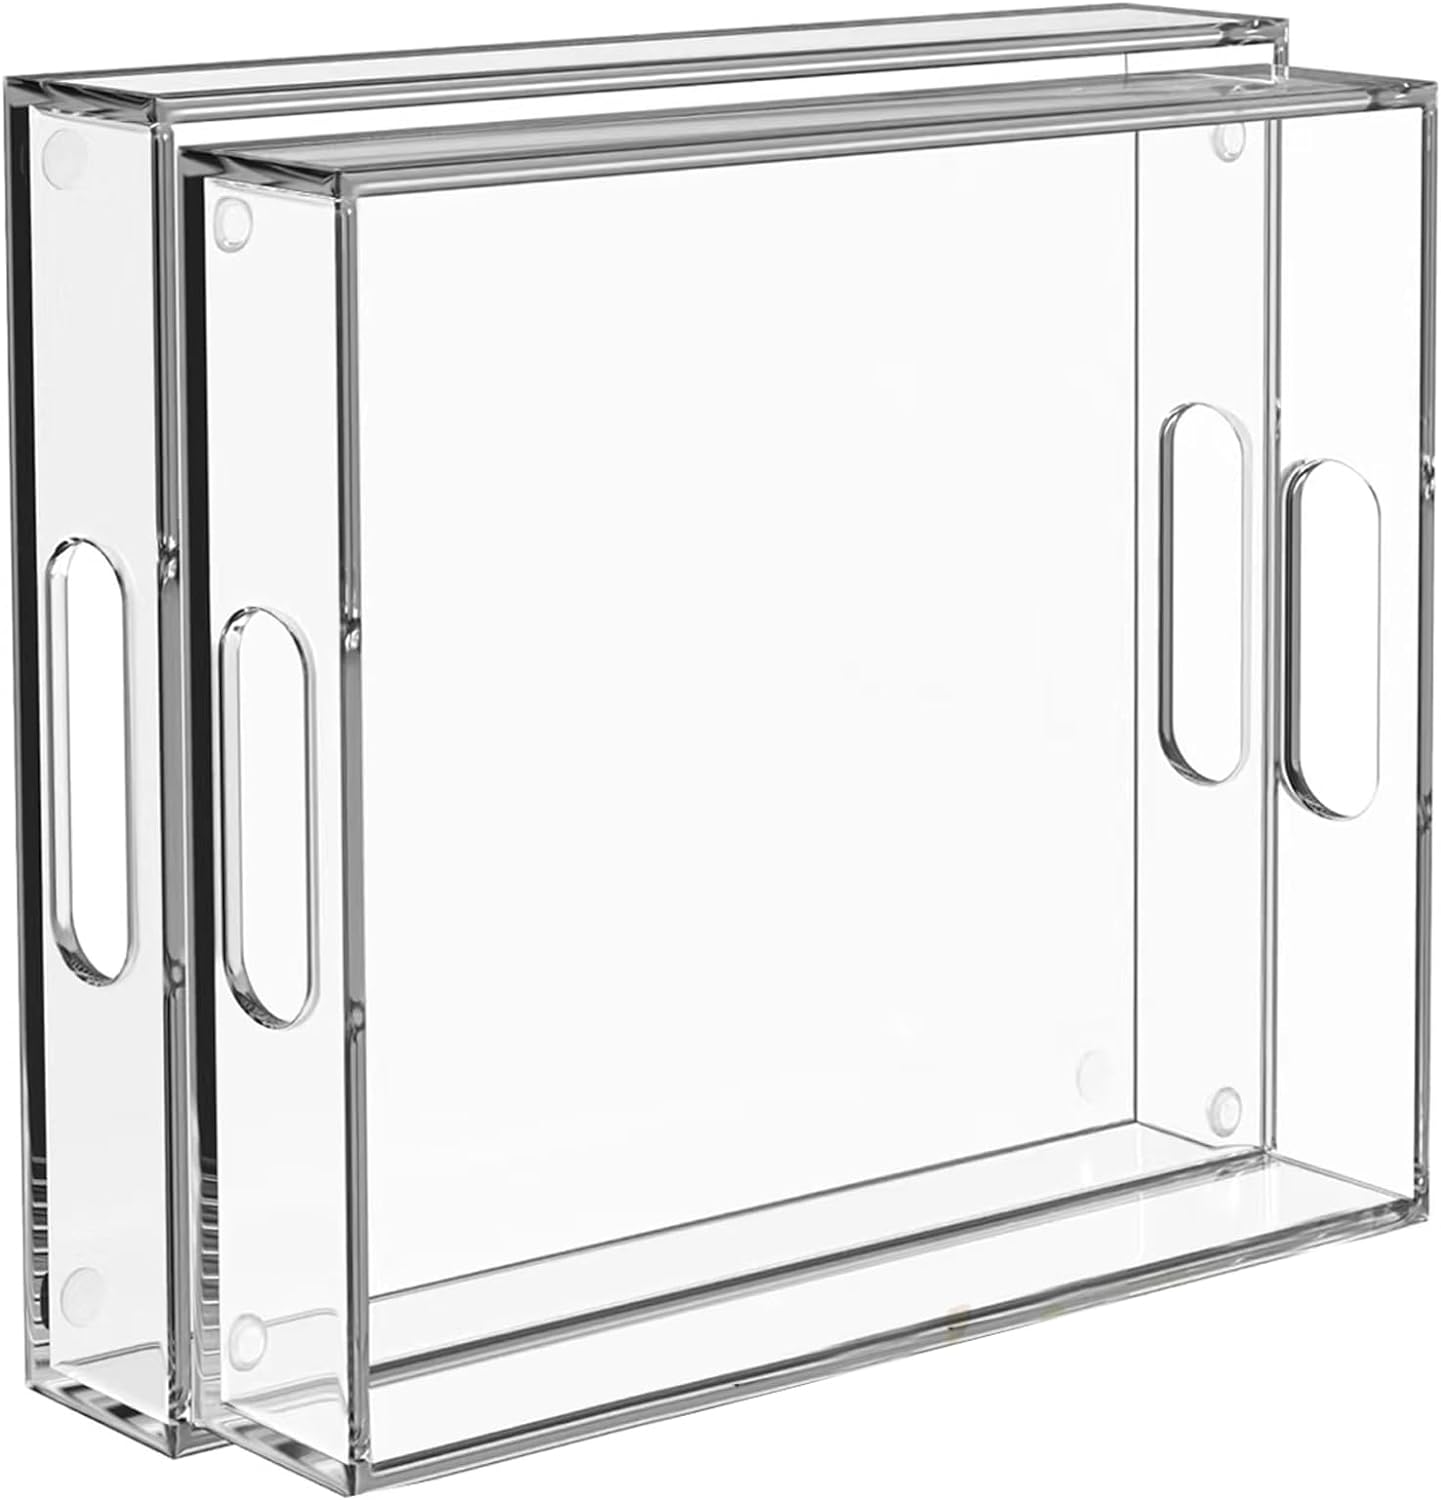 Clear Acrylic Tray - 8x12 Acrylic Tray with Handle for Organizing and Serving